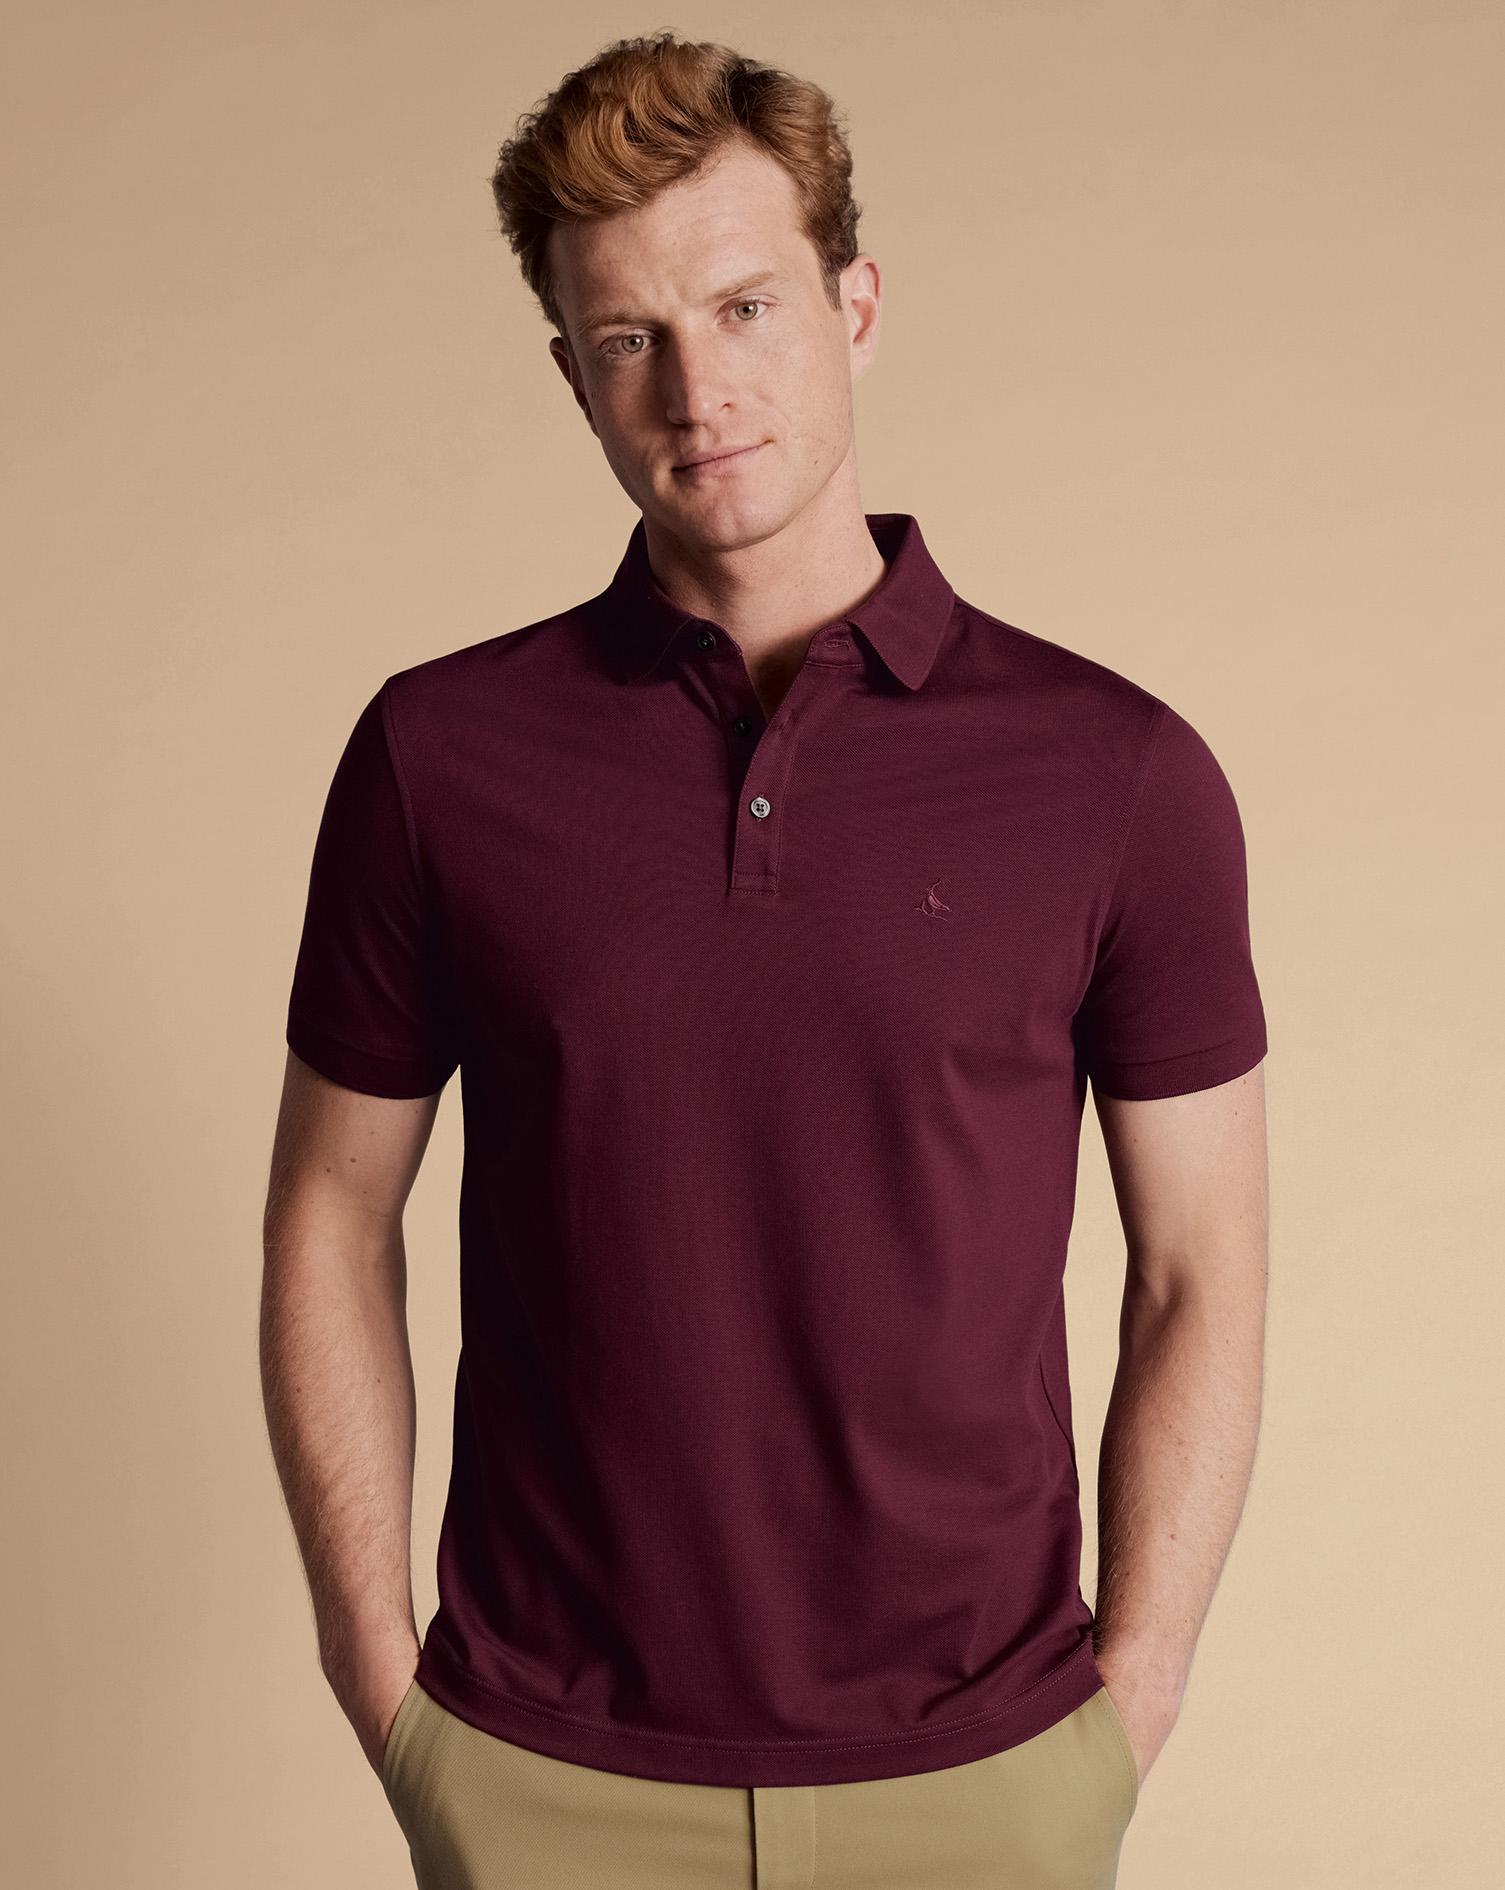 Men's Charles Tyrwhitt Pique Polo Shirt - Wine Red Size Large Cotton
